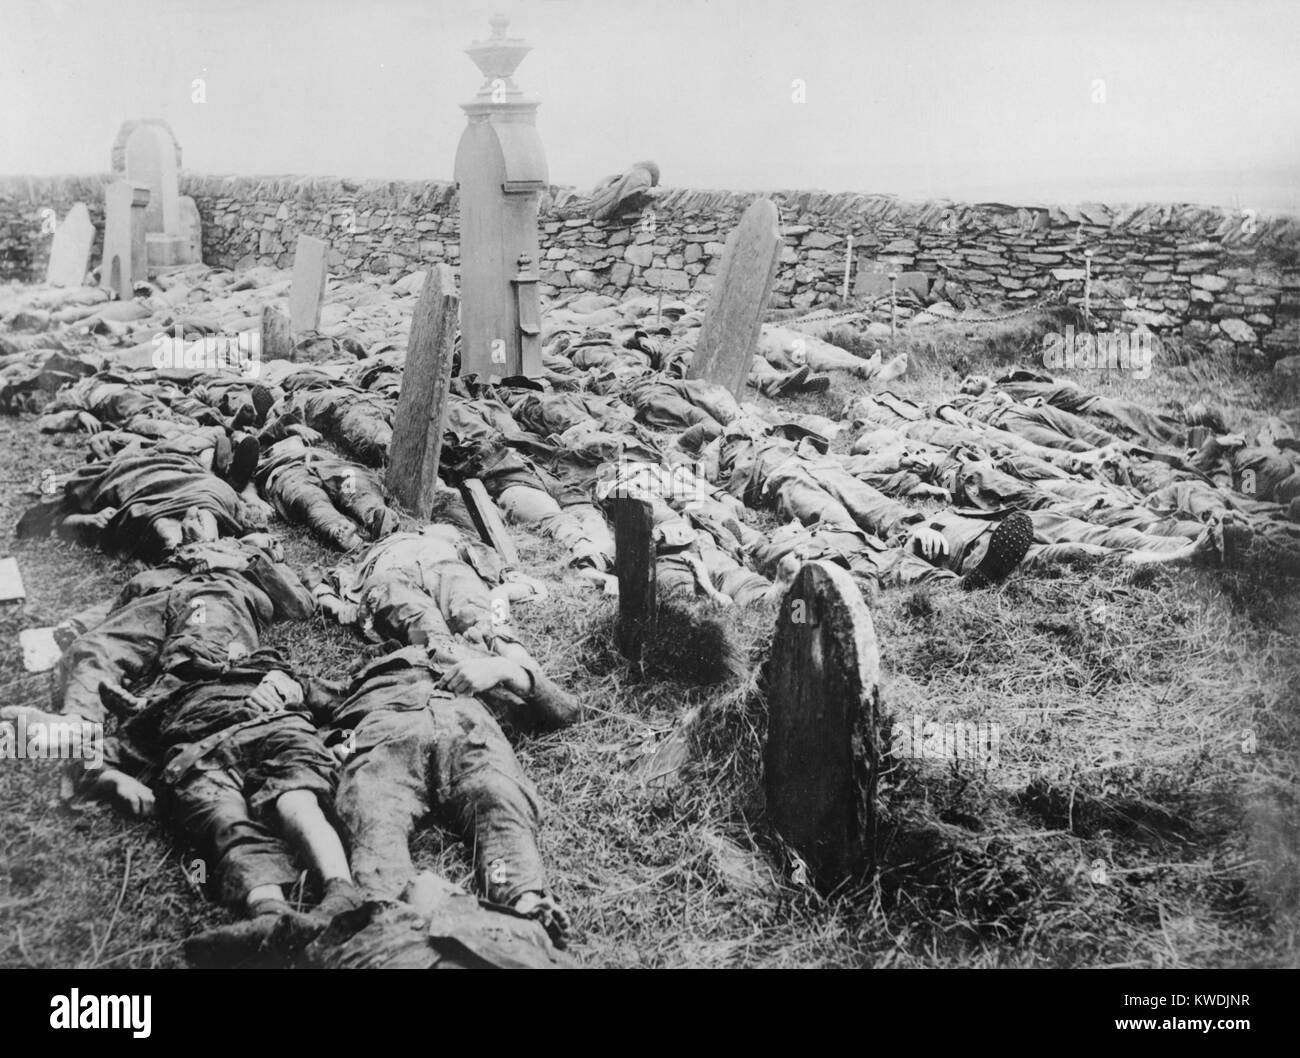 Dead American soldiers laid out in the churchyard at Kilchoman, Islay, Scotland during WW1. They were aboard the troopship, SS OTRANTO, which broke up and sunk after a collision during a storm on Oct. 6, 1918, killing 470 including its British crew of 96 and 357 US soldiers (BSLOC 2017 17 114) Stock Photo